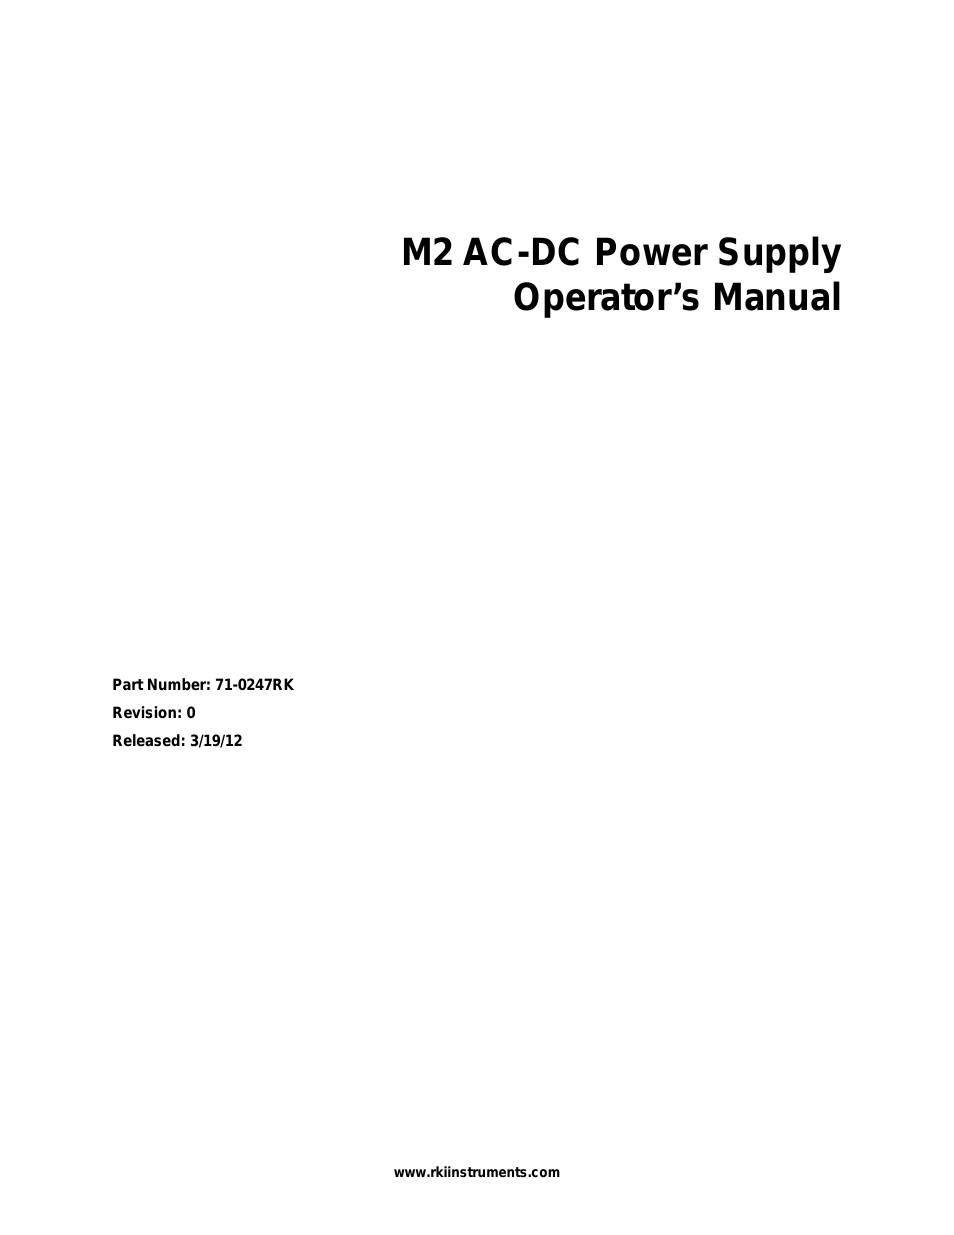 M2 for AC-DC